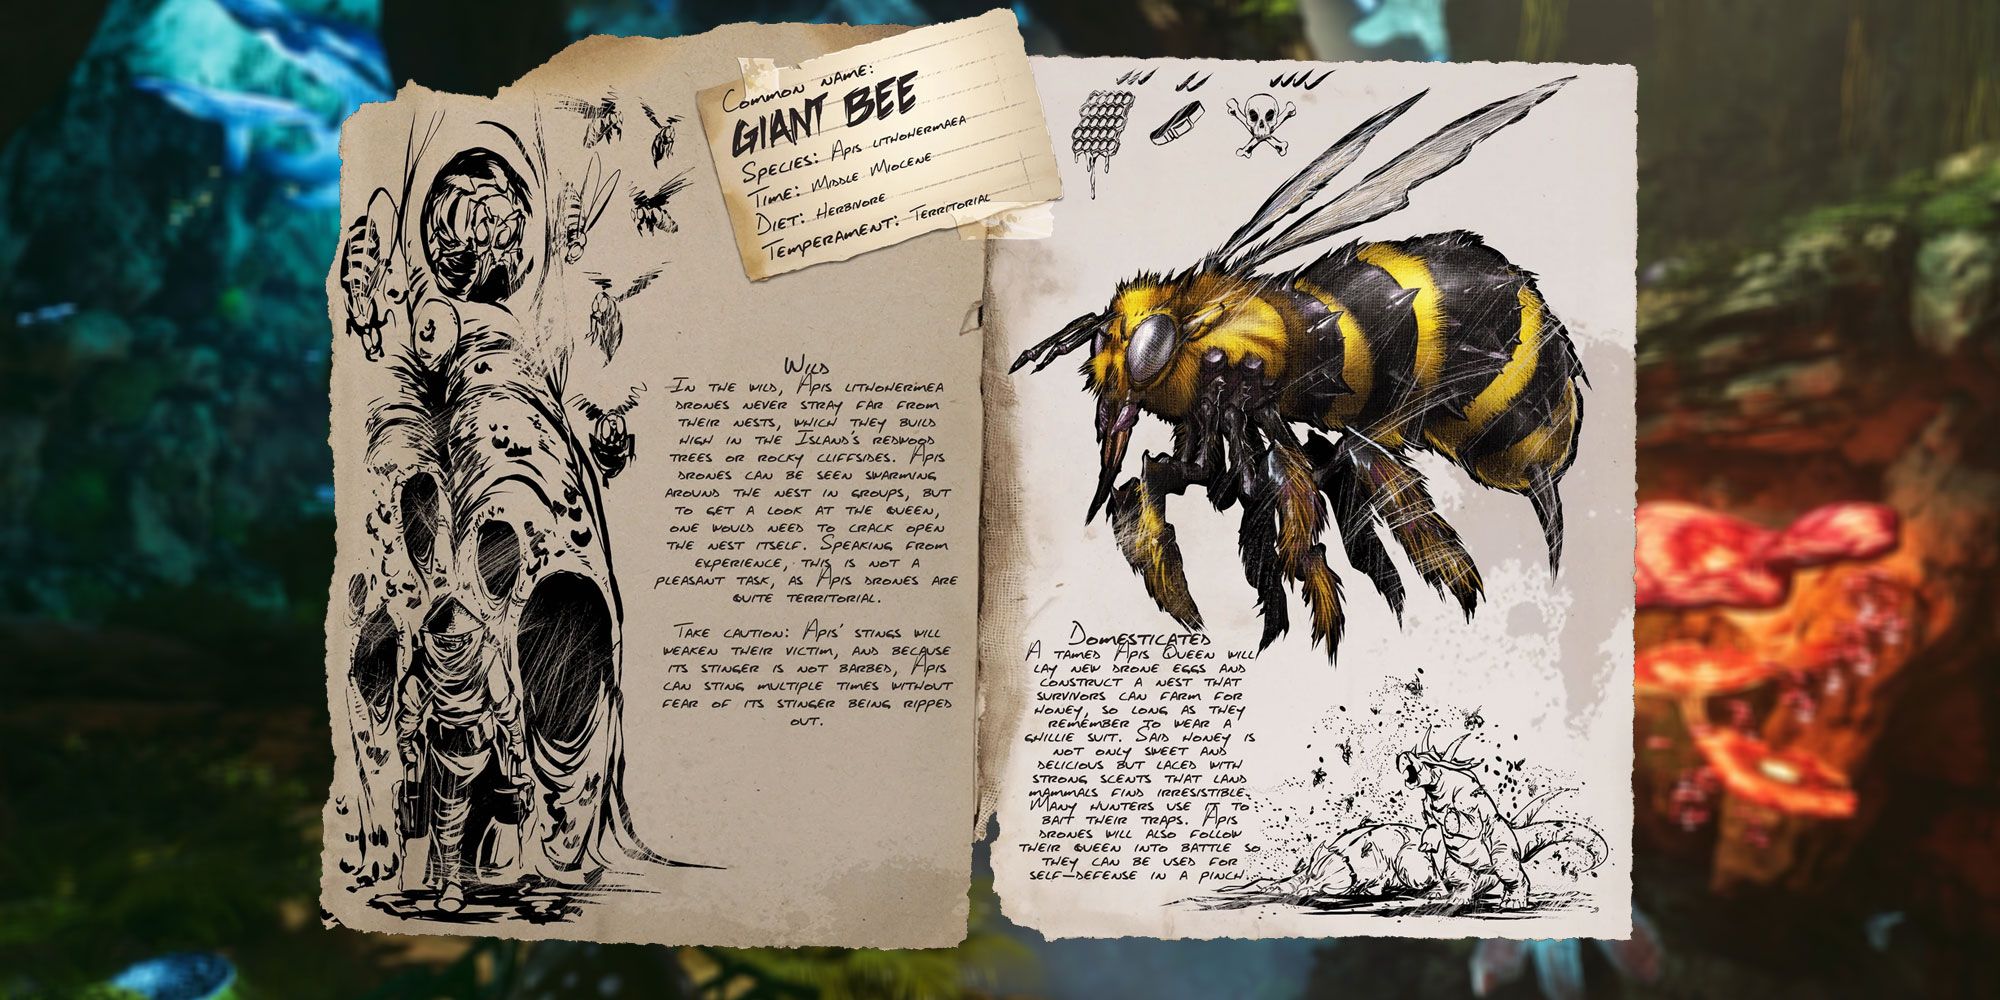 Giant Bee encyclopedia entry in Ark Survival Ascended.